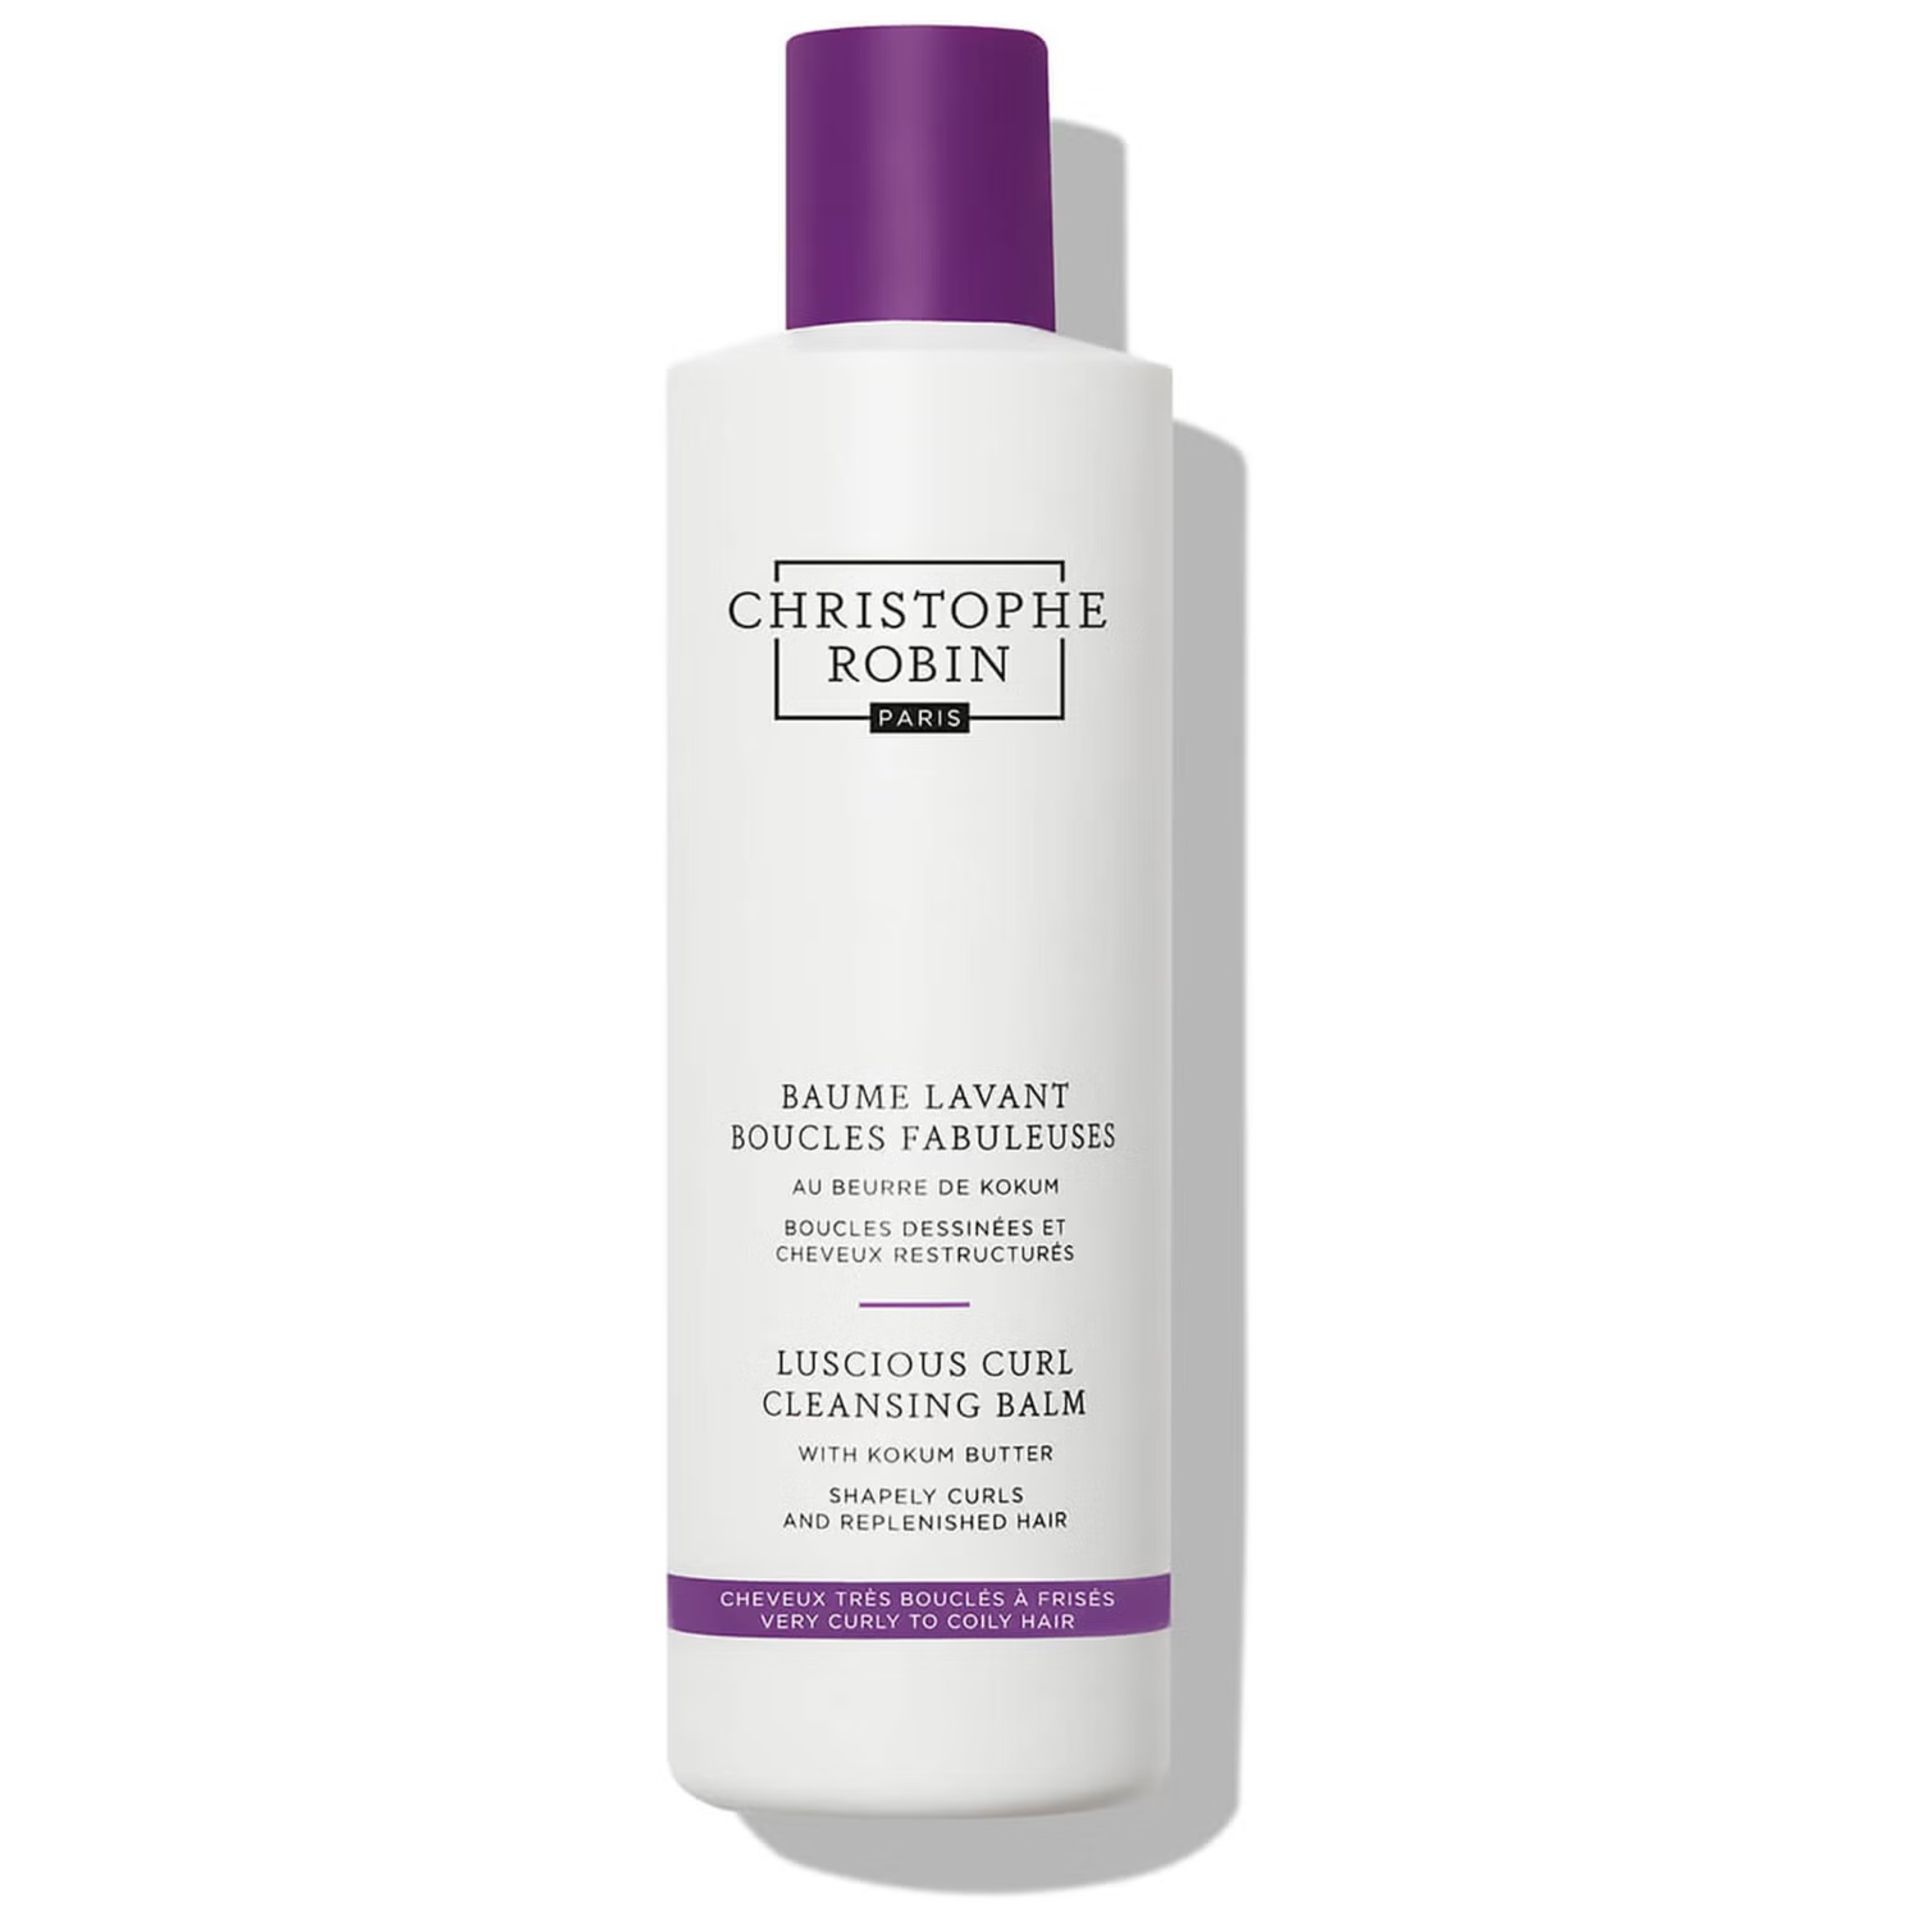 15x NEW CRISTOPHE ROBIN Lucious Curl Cleansing Balm 250ml. RRP £19.80 EACH. (EBR2). This low-foaming